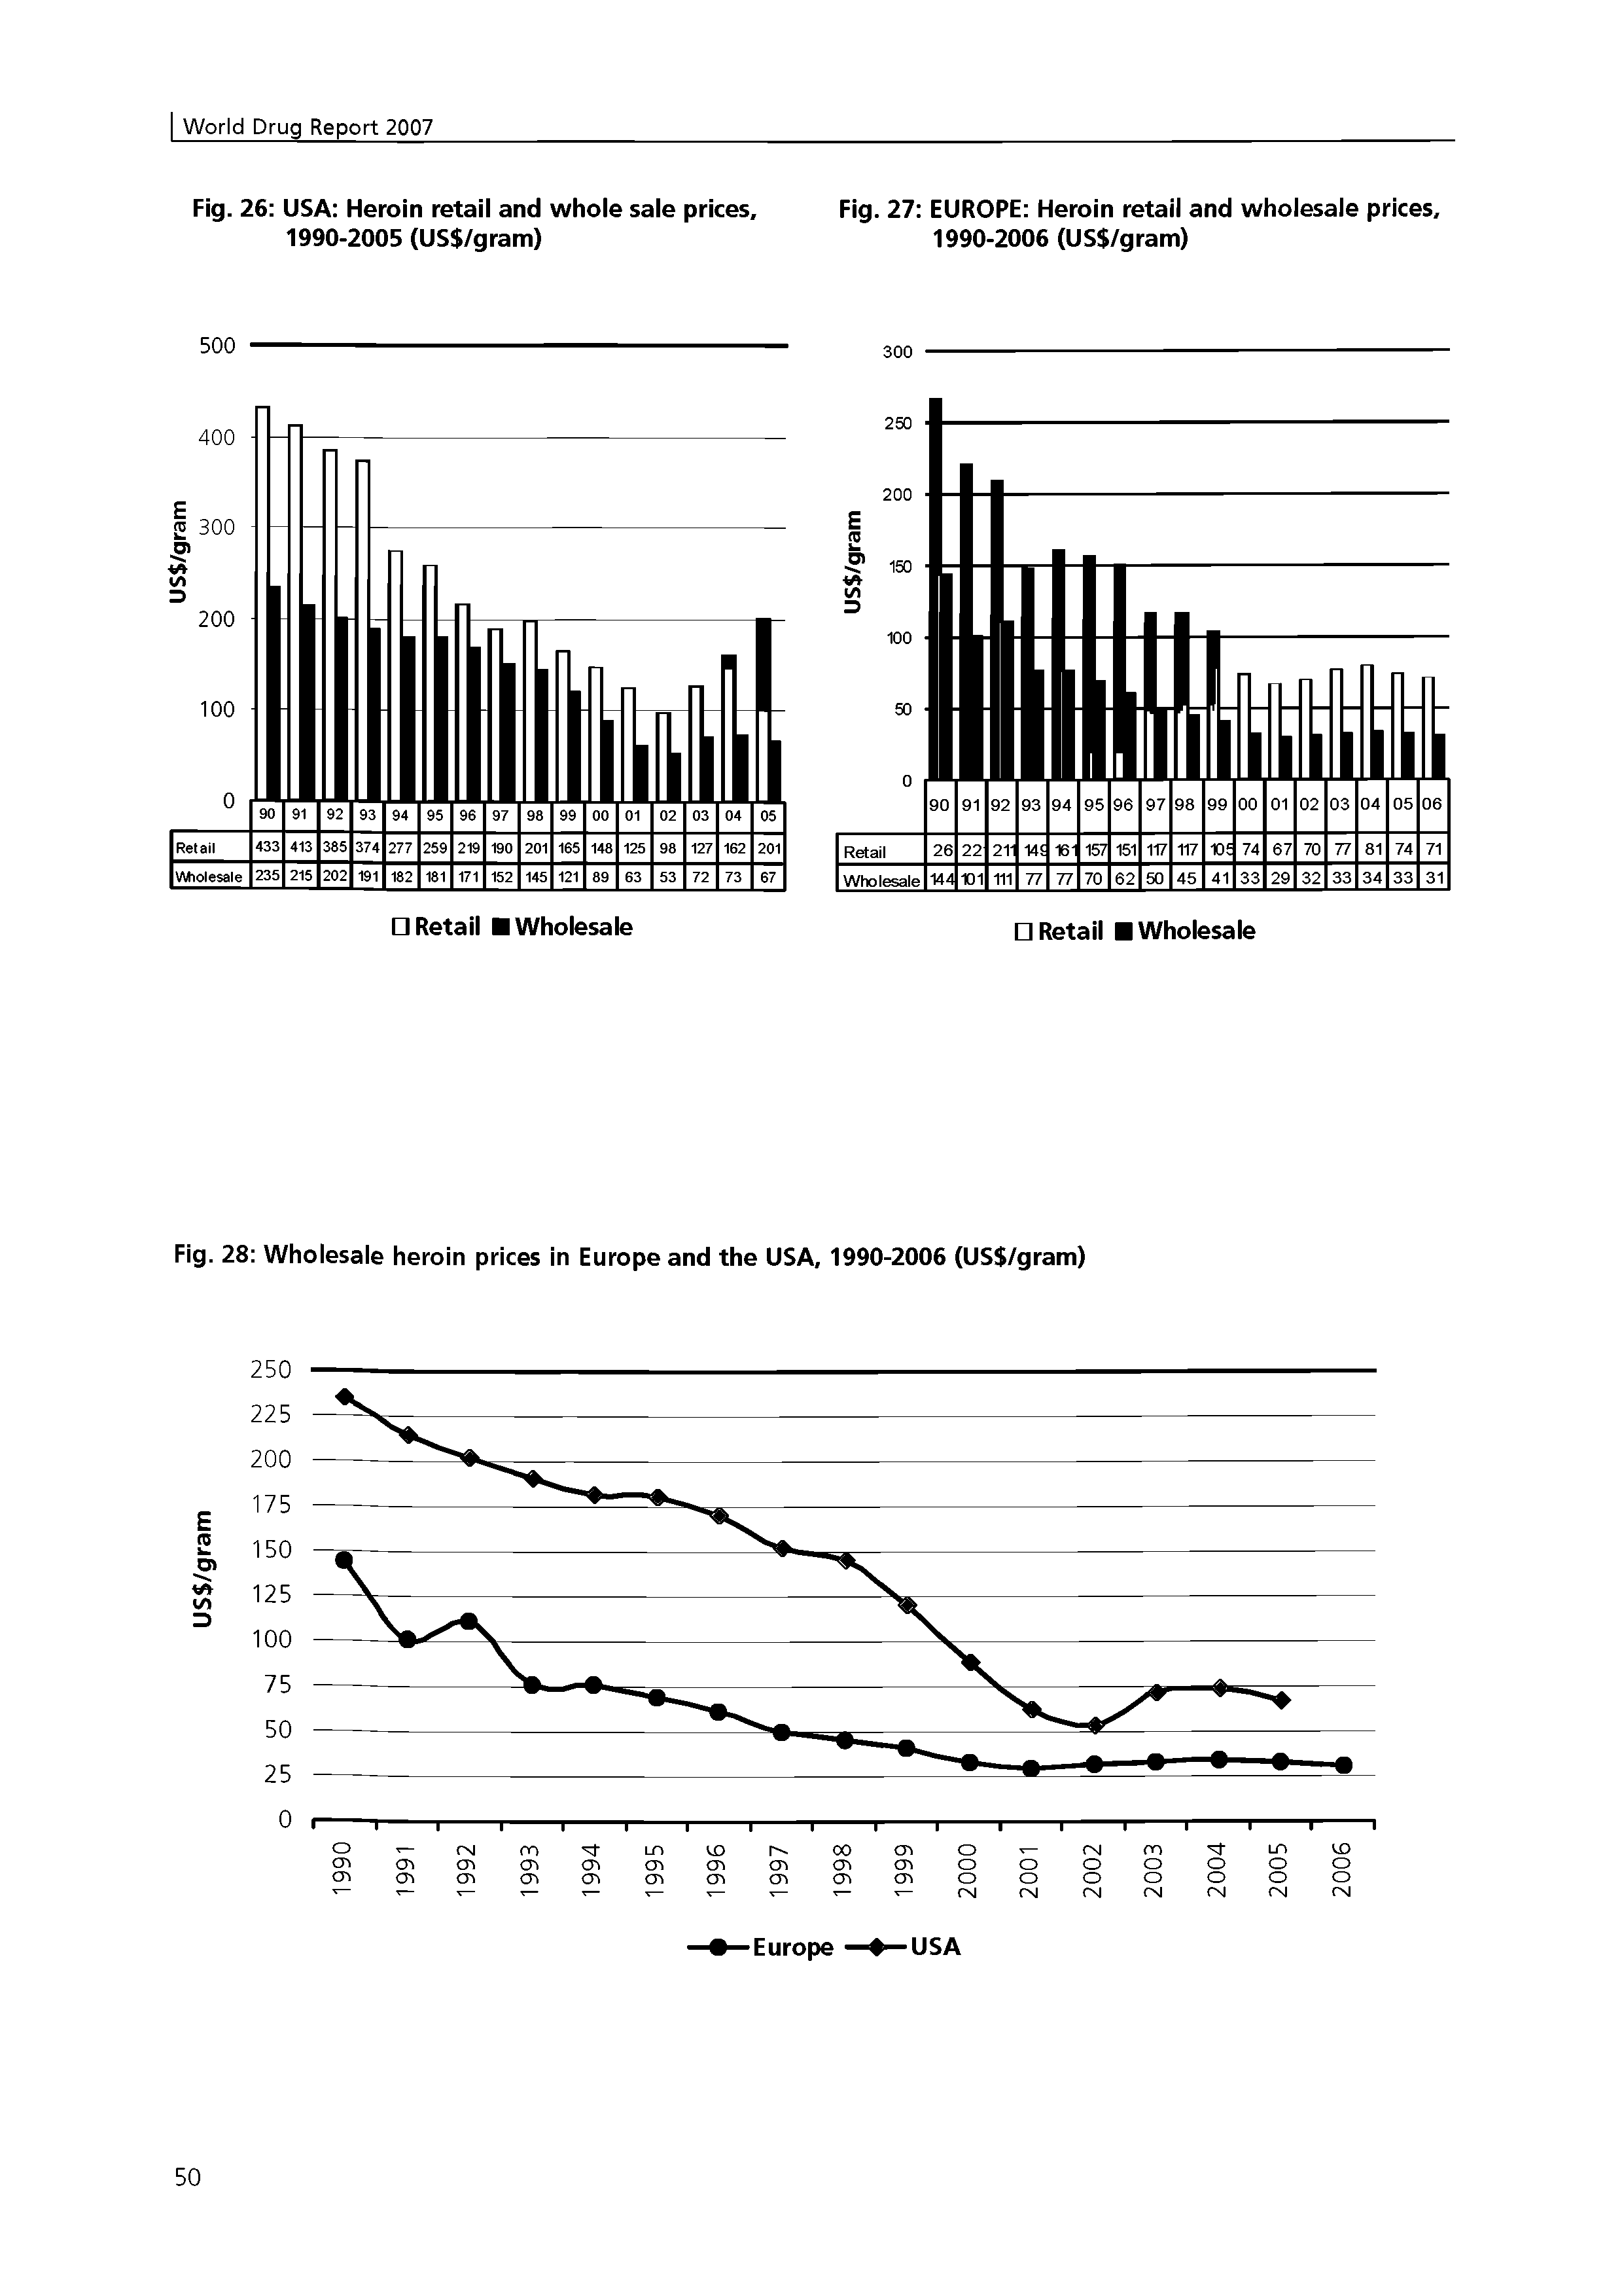 Fig. 27 EUROPE Heroin retail and wholesale prices, 1990-2006 (US /gram)...